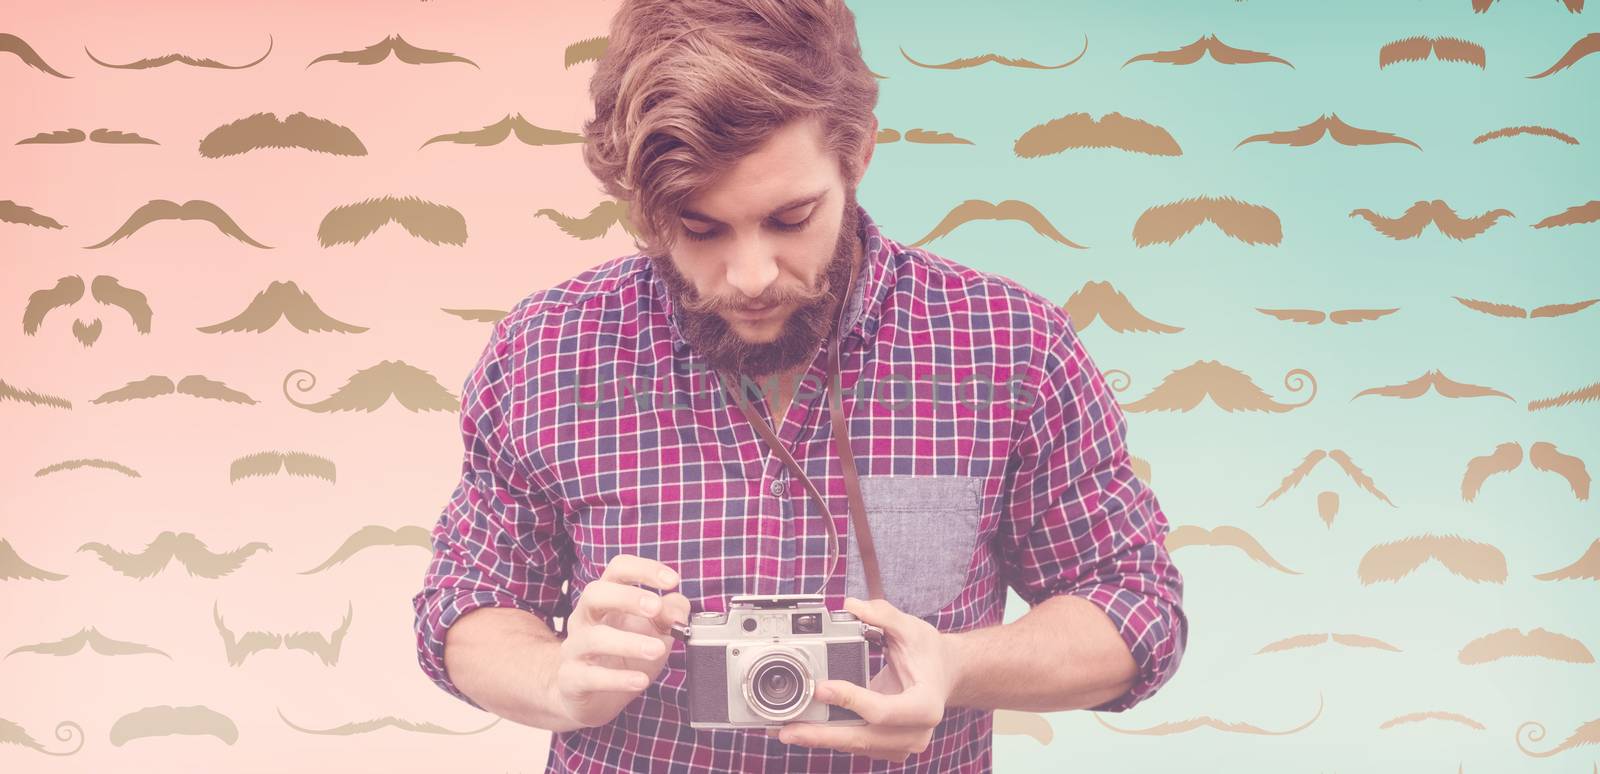 Hipster using camera against composite image of mustaches